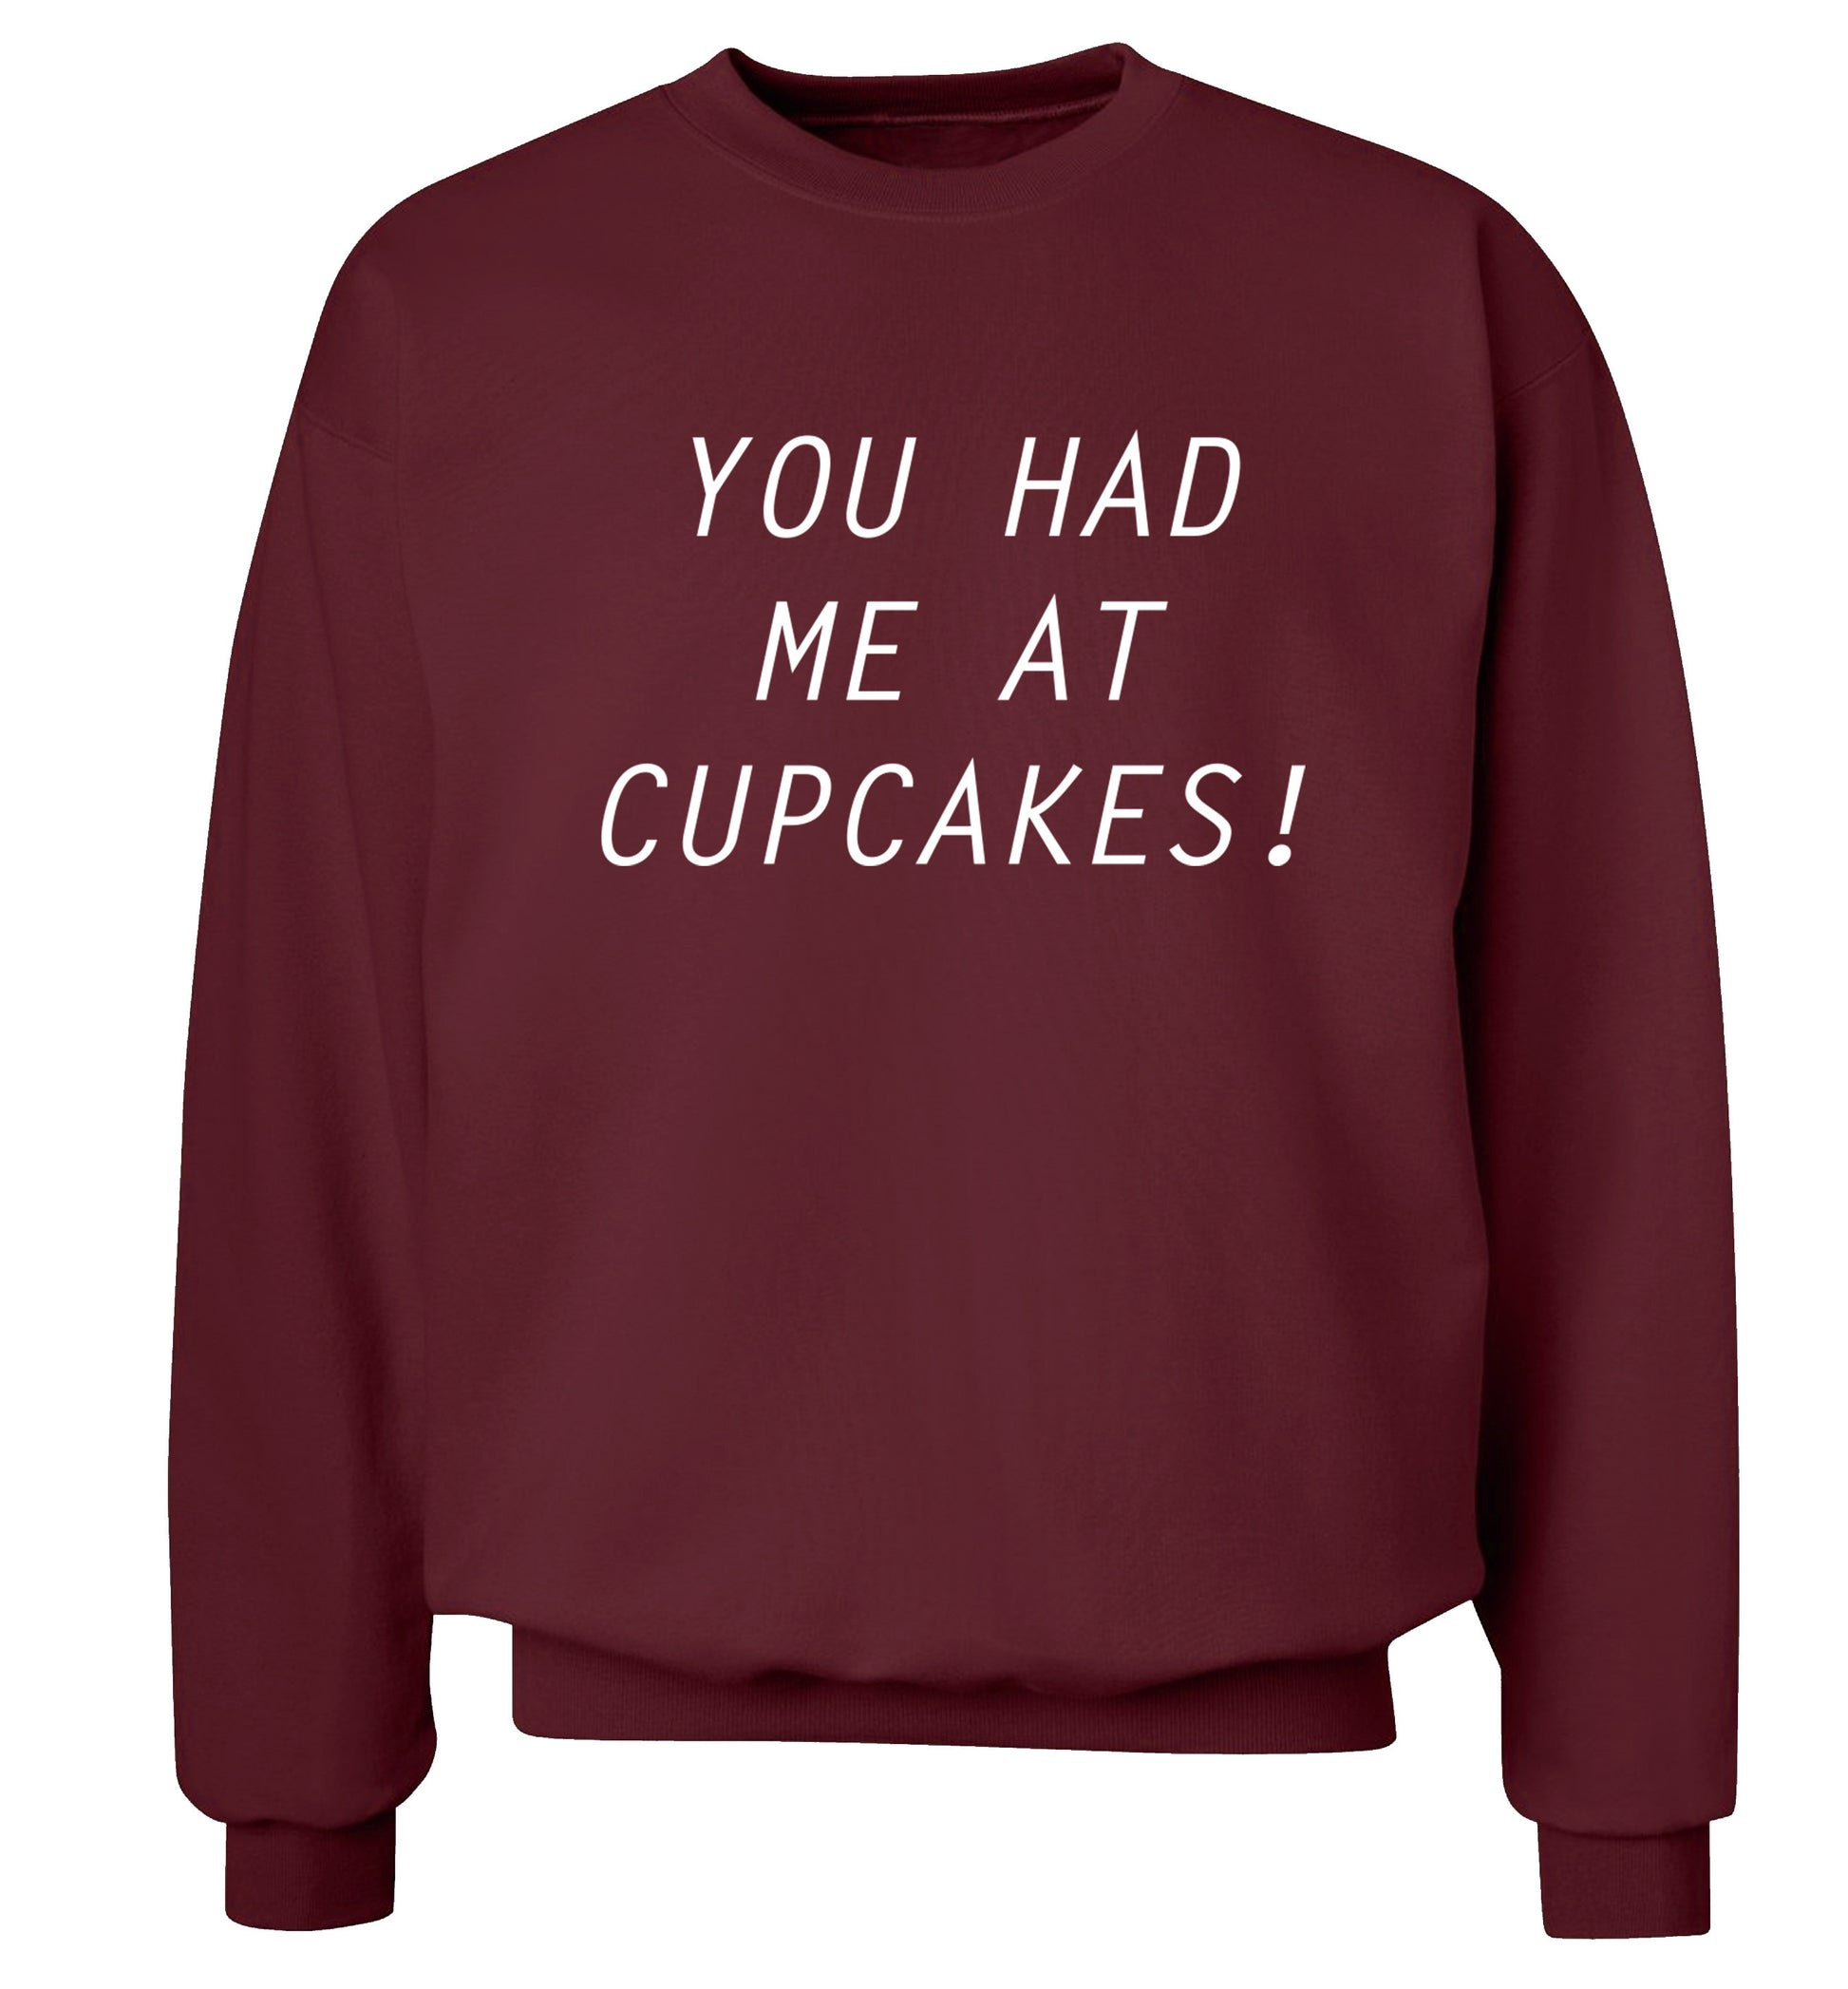 You had me at cupcakes Adult's unisex maroon Sweater 2XL